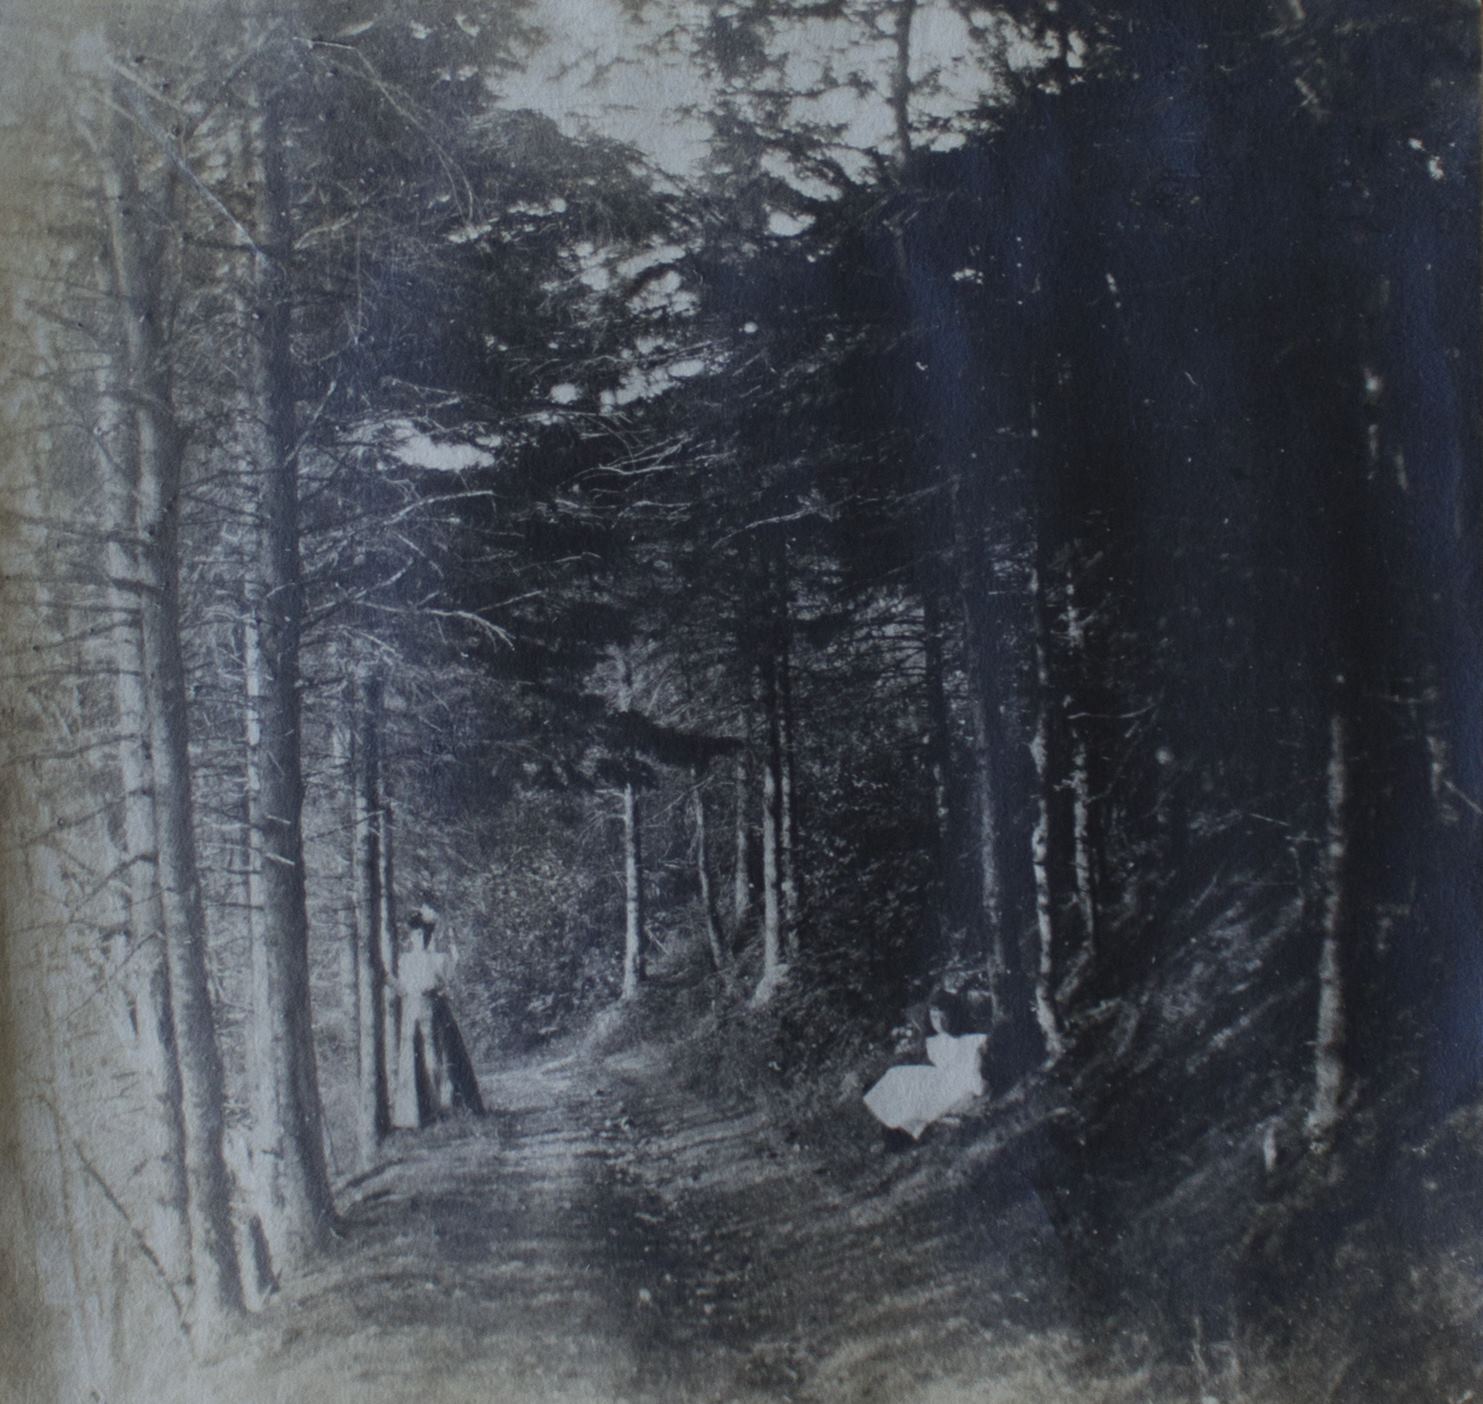 An old photo showing a young woman and a girl on a trail deep in a forest.